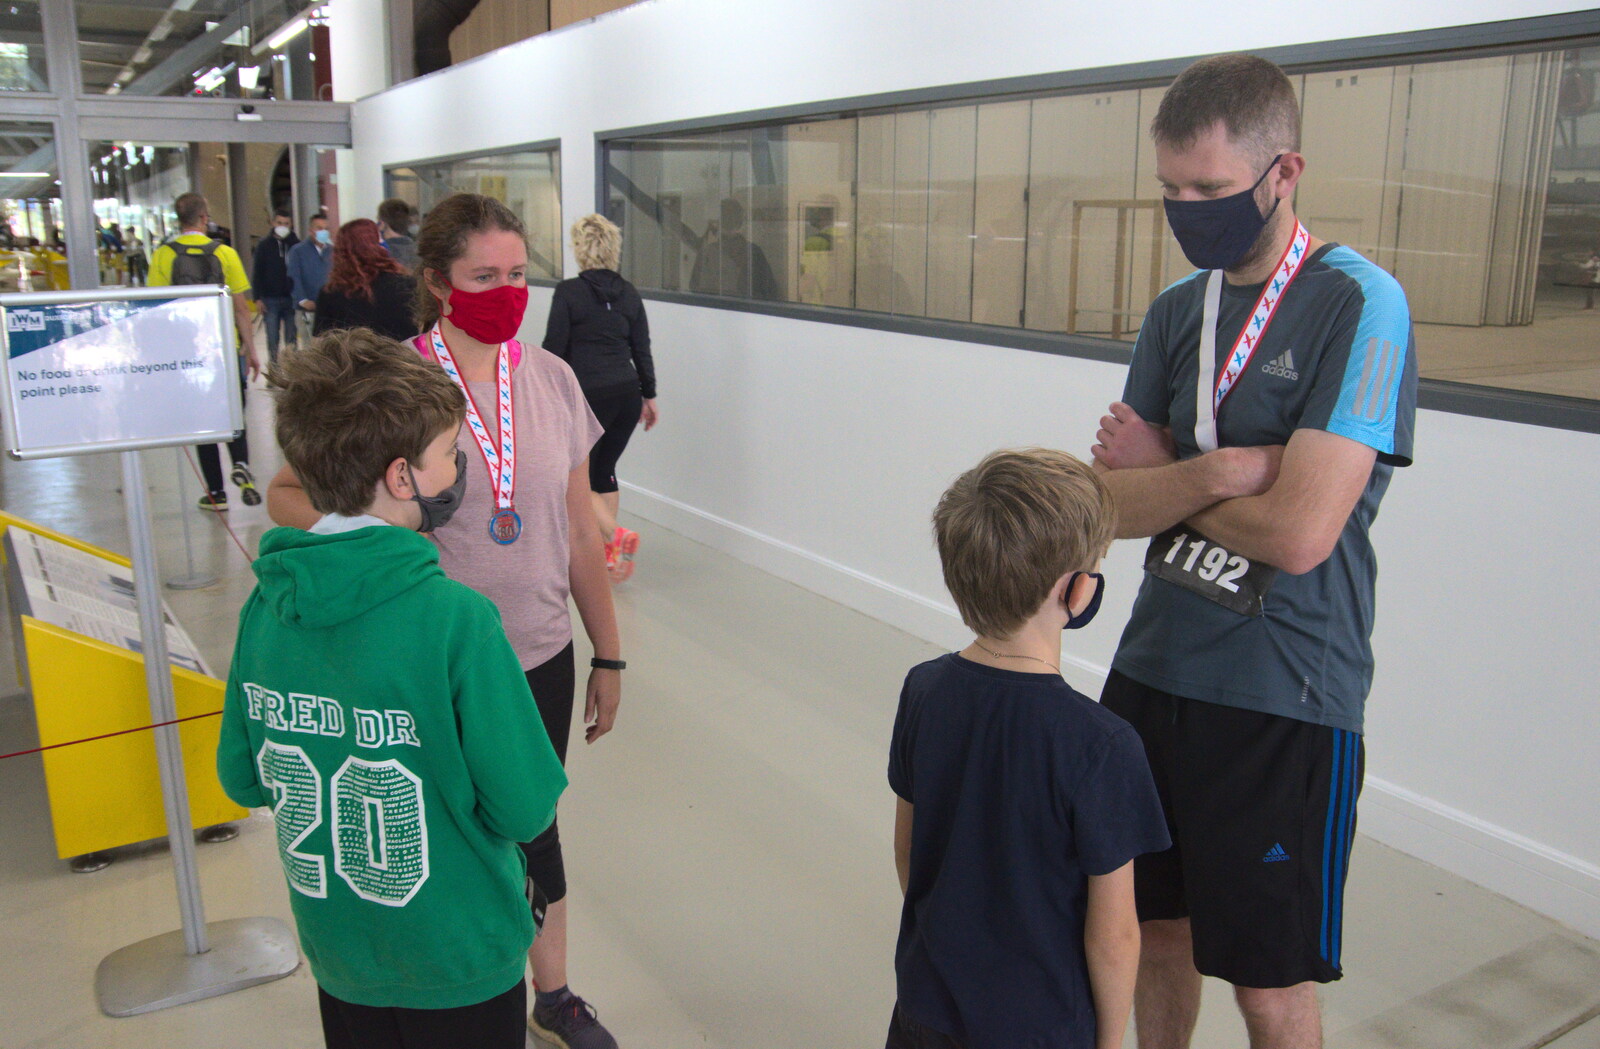 Isobel and Phil have their medals on from The Duxford Dash, IWM Duxford, Cambridge - 13th September 2020